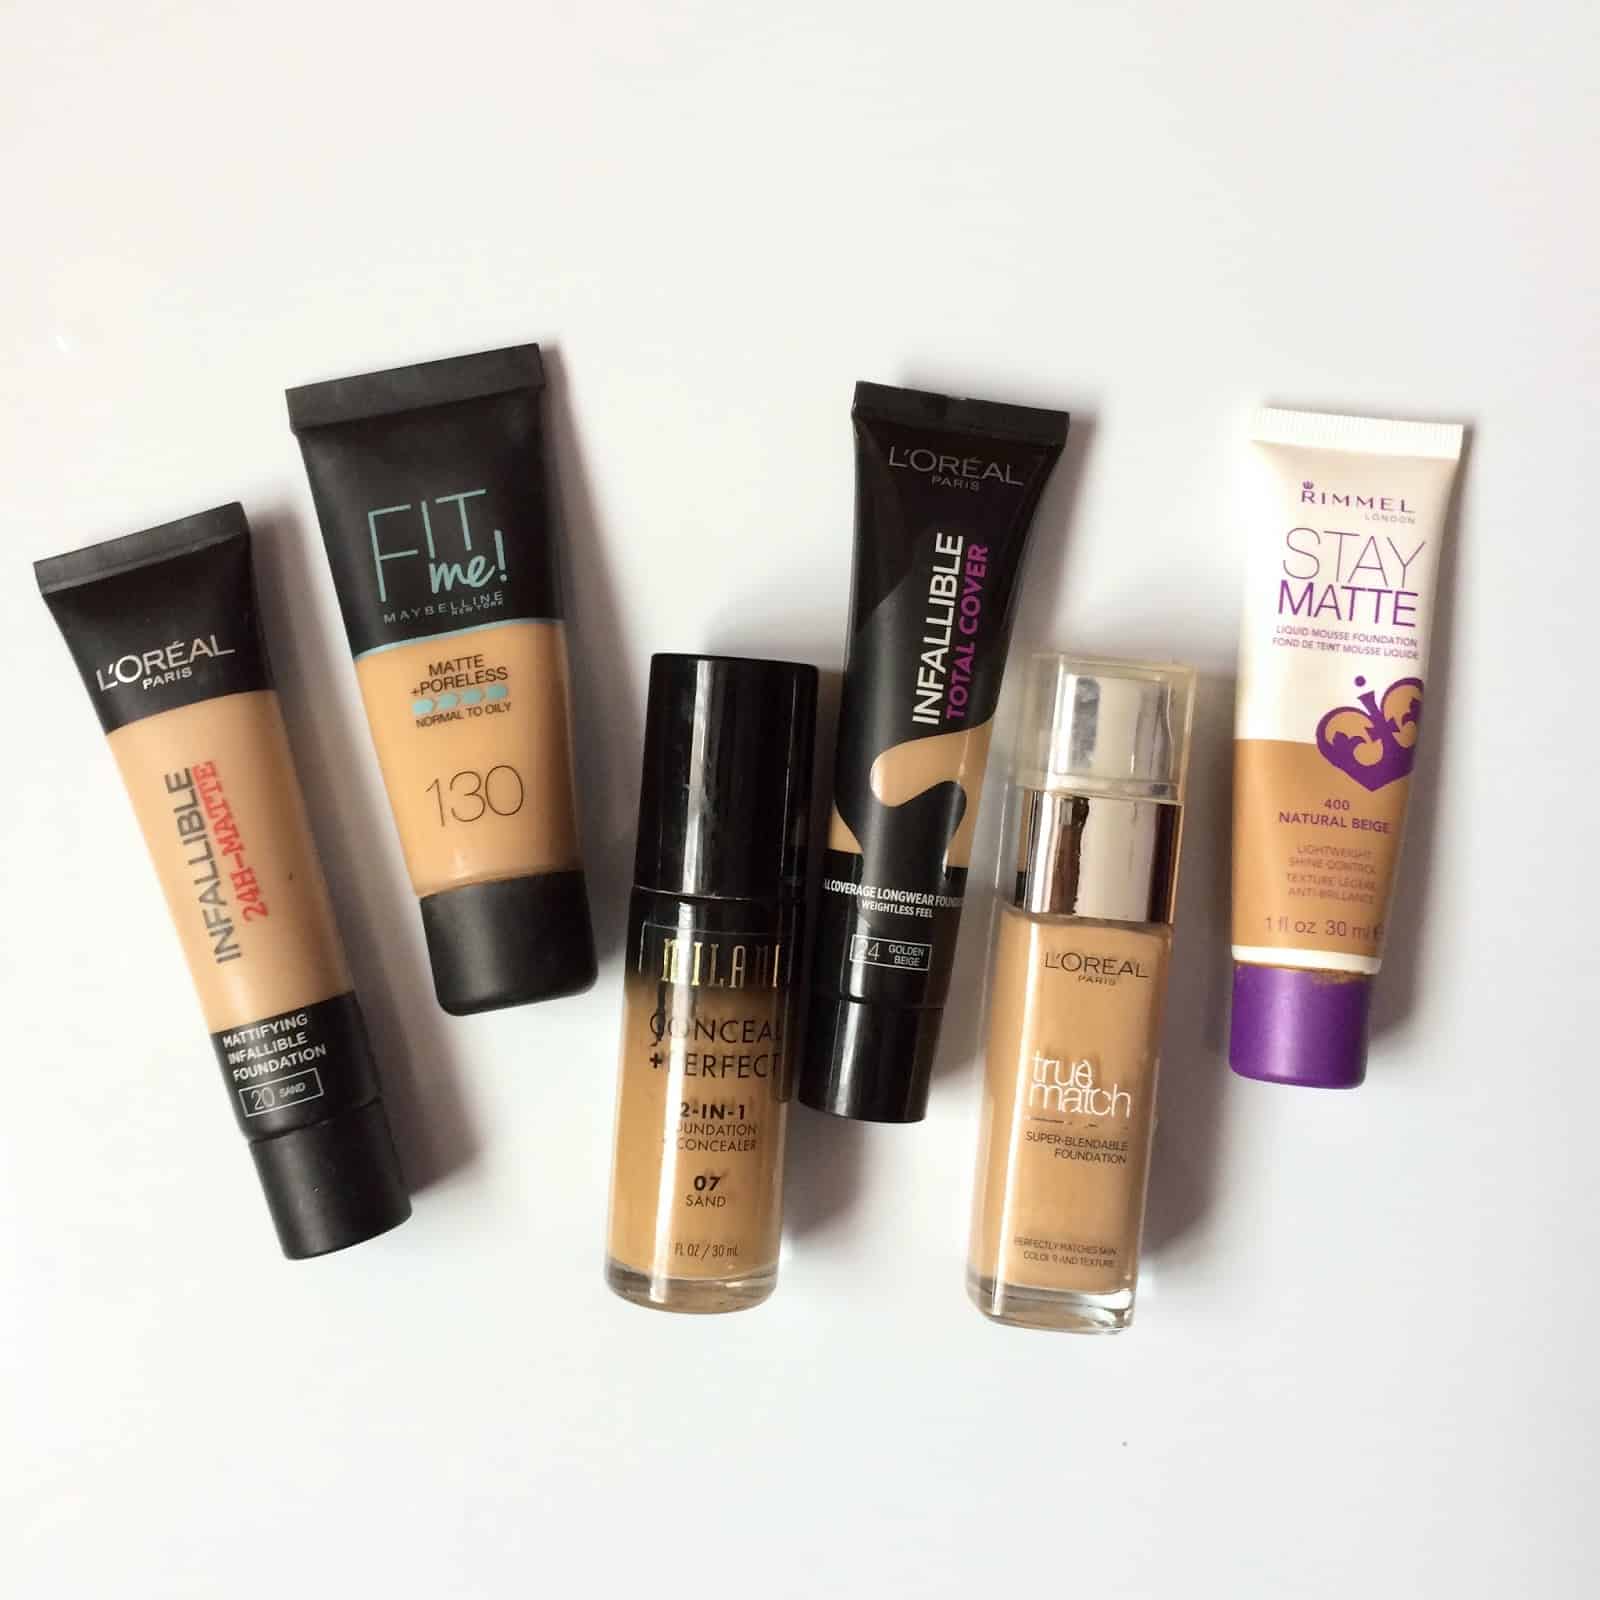 BEST DRUGSTORE/AFFORDABLE FOUNDATIONS FOR VERY OILY SKIN